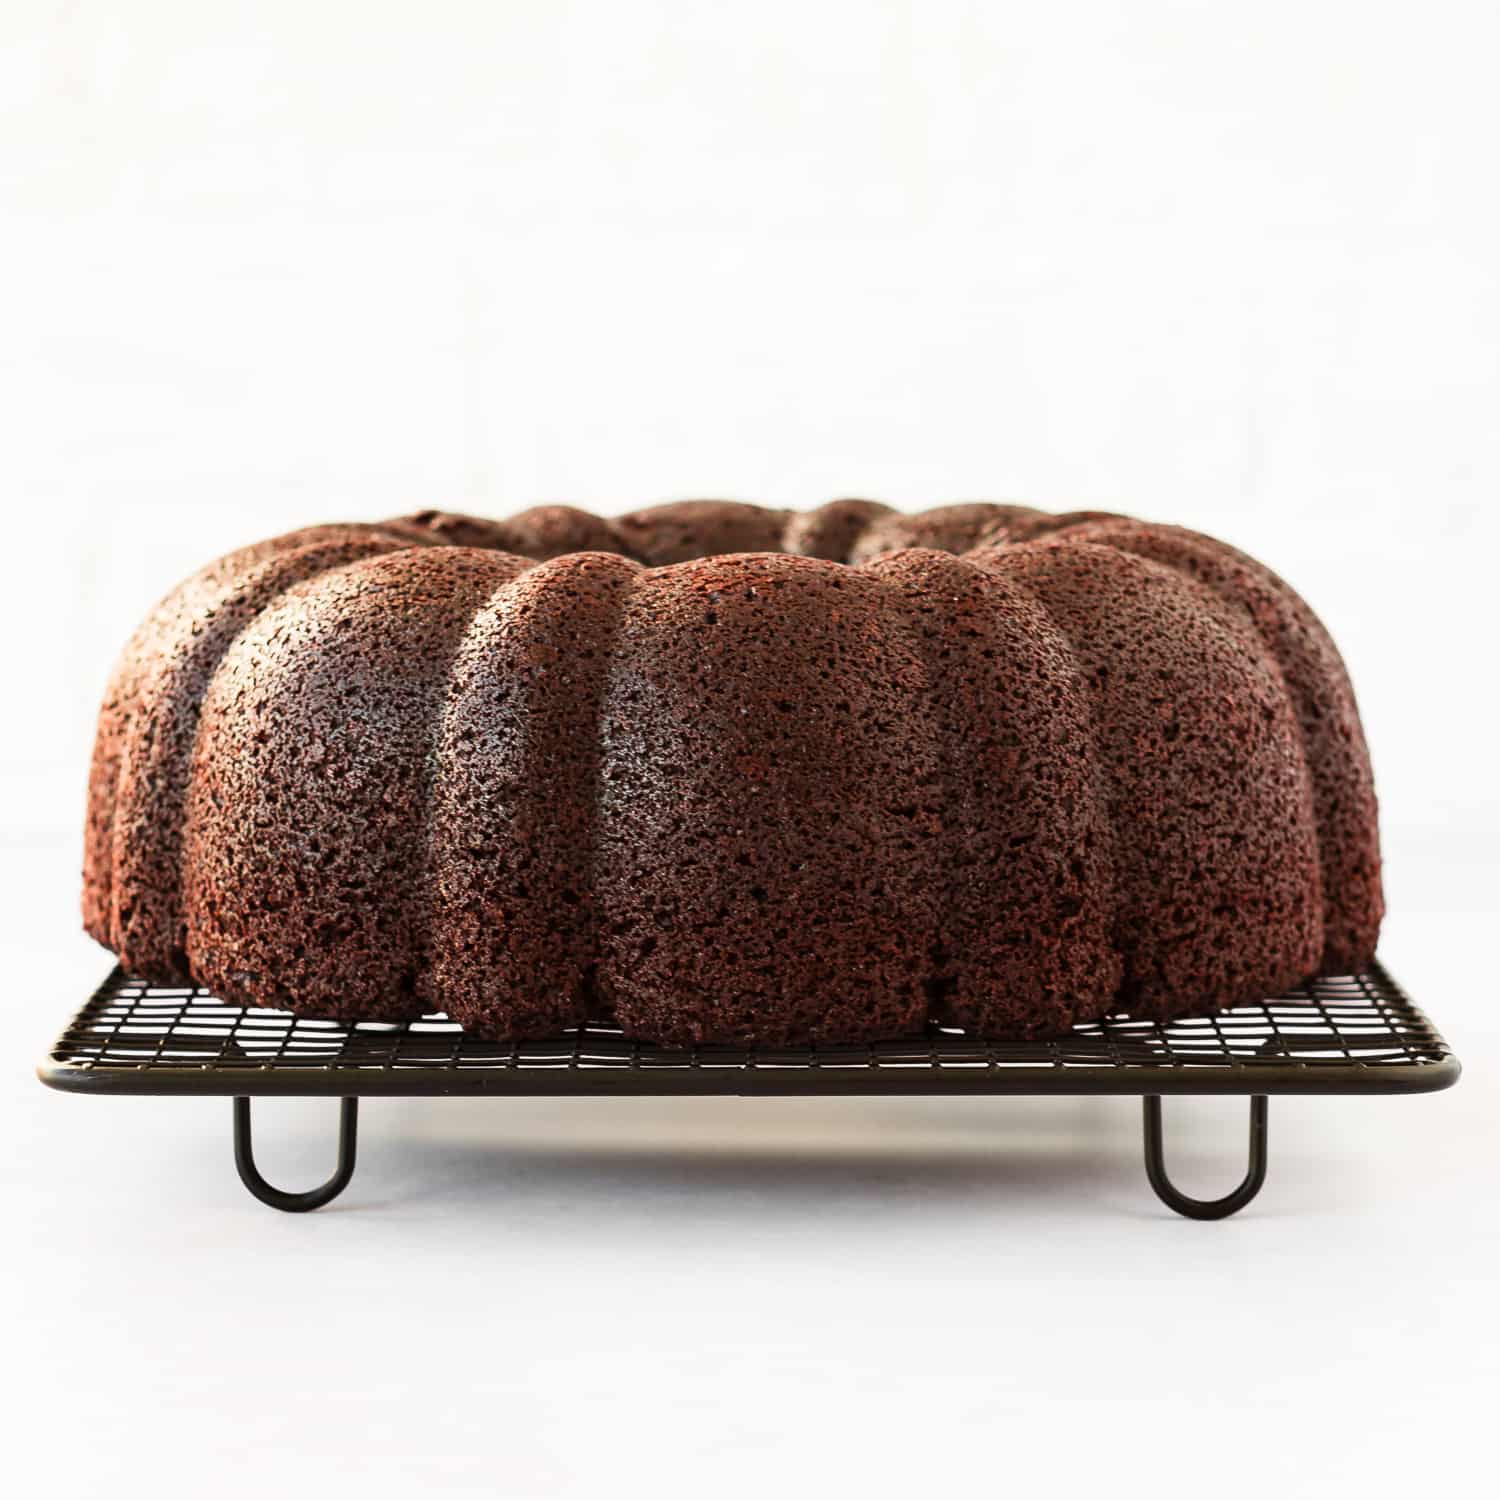 baked Eggless Chocolate Bundt cake over a cooling rack.